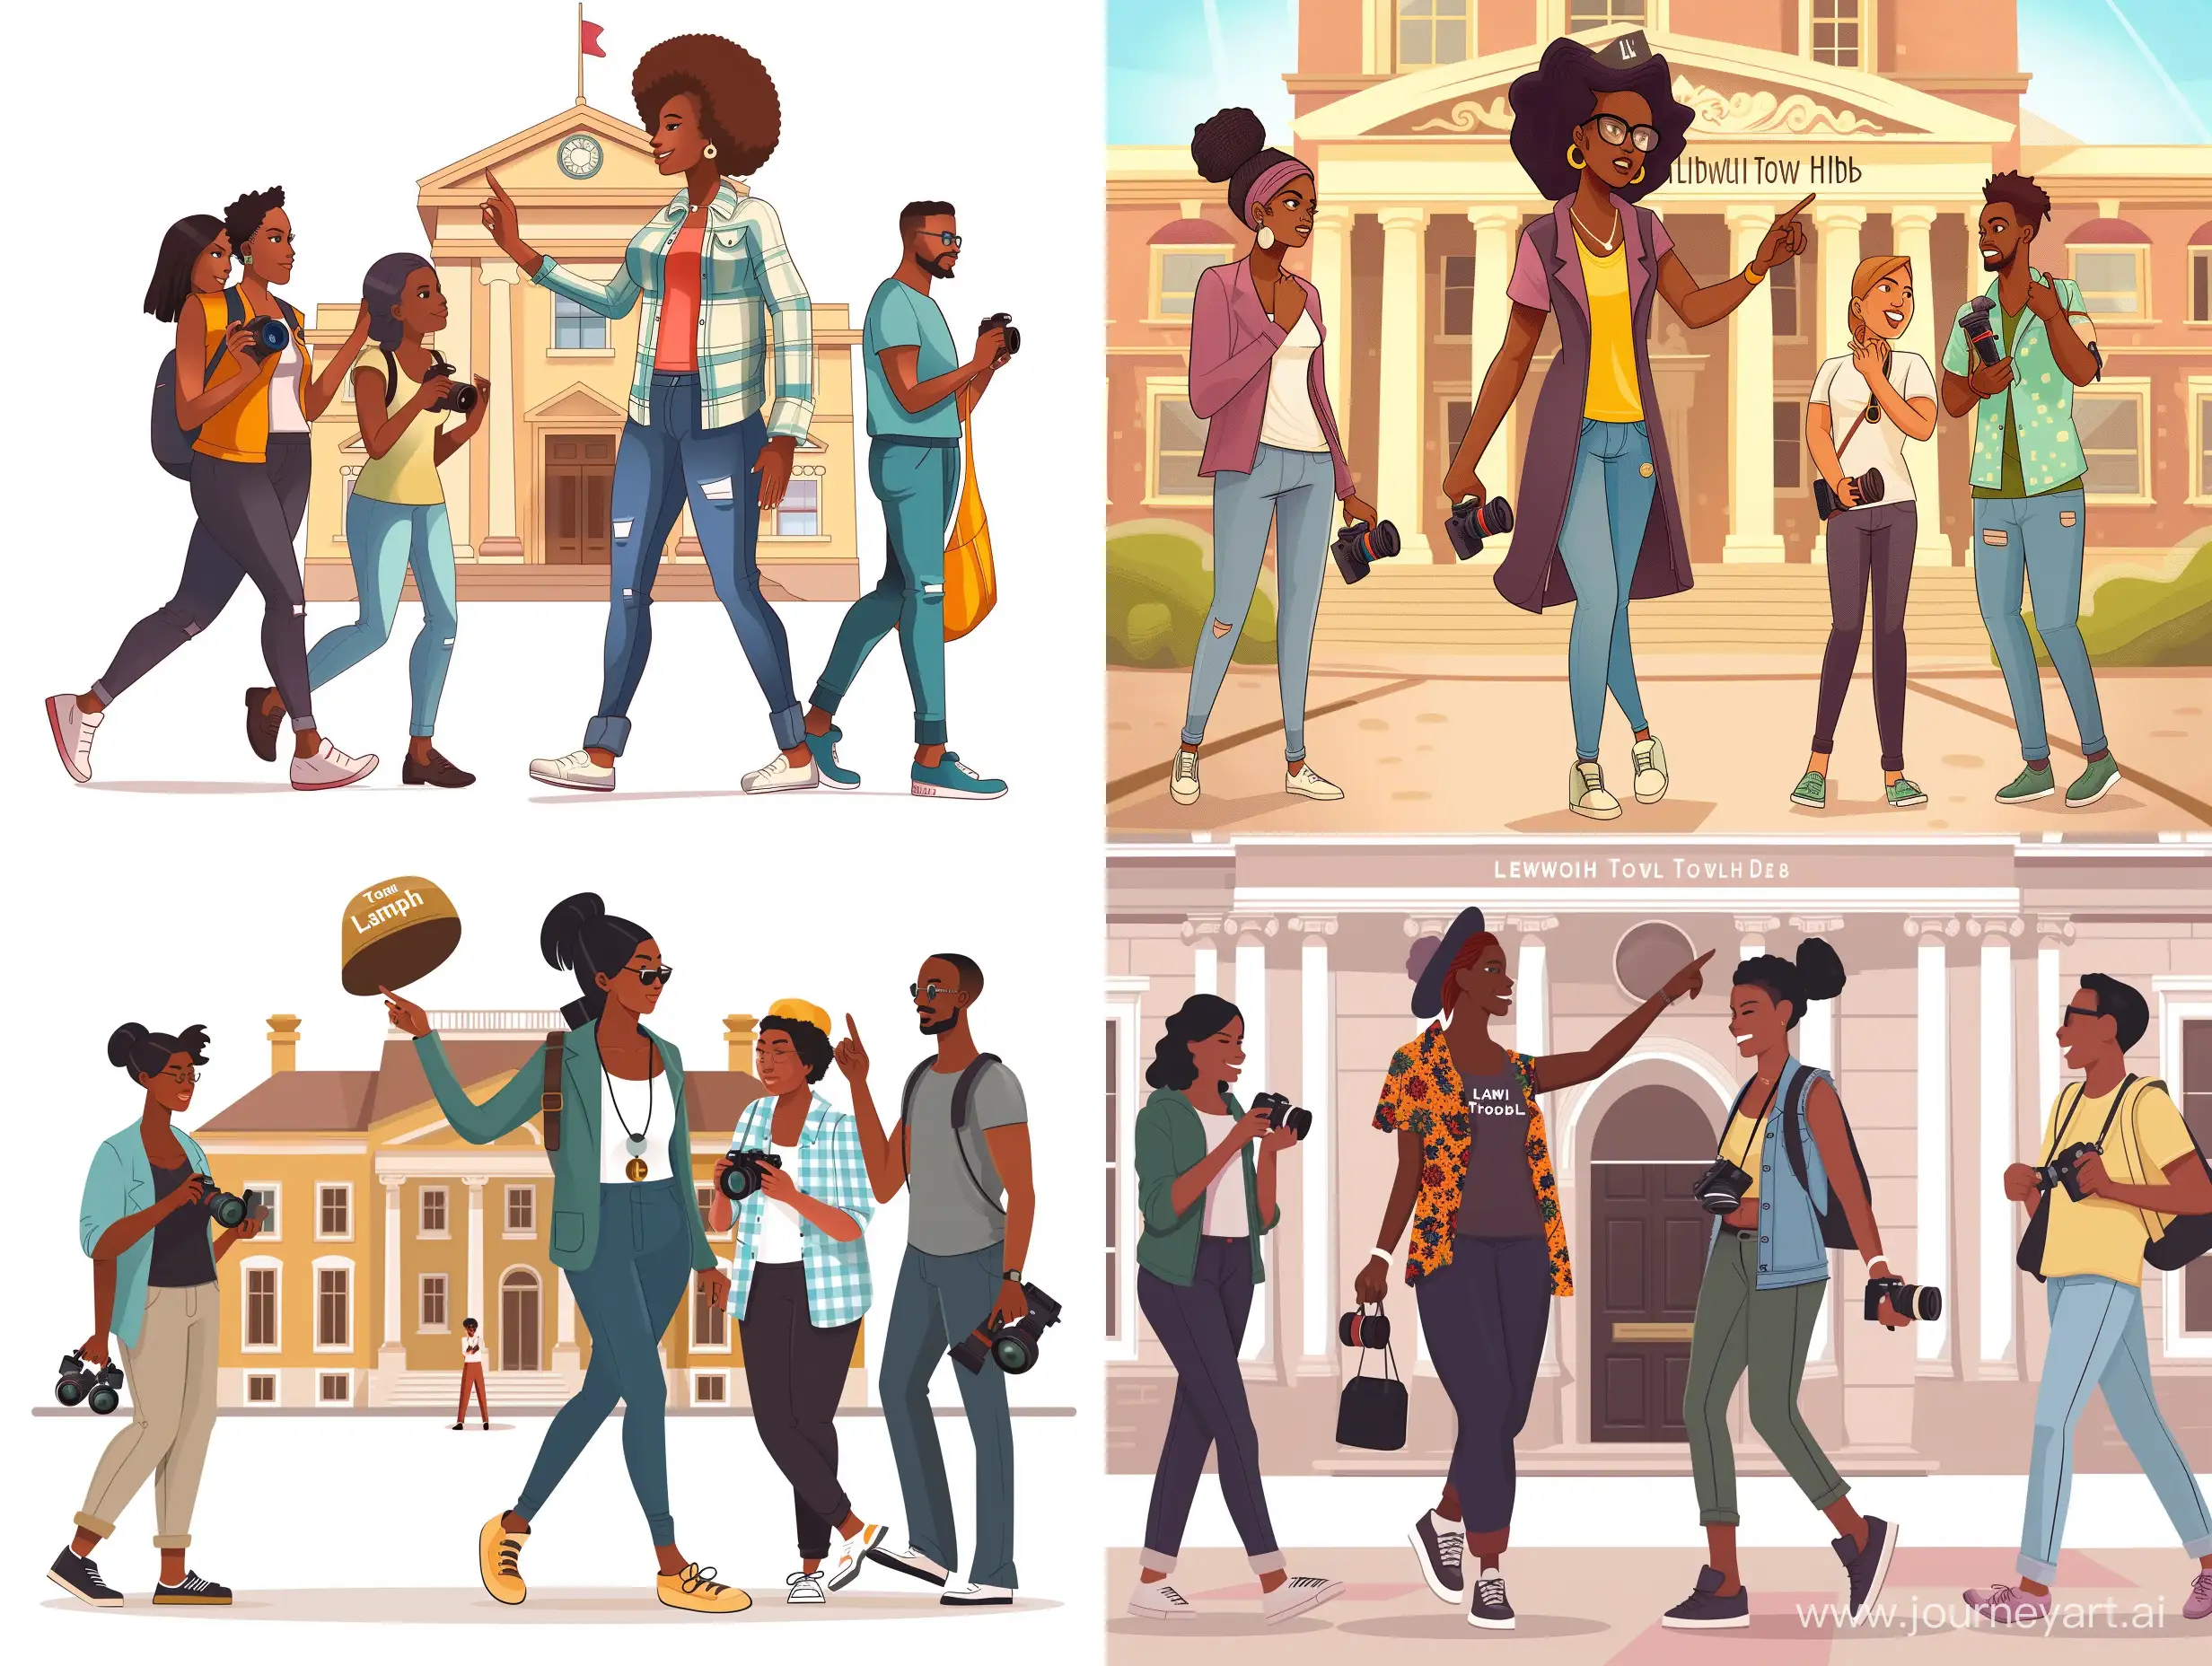 Colourful Cartoon style, black woman tour guide walking and pointing at Lambeth Town Hall, walking with two casually dressed black women and one black man holding cameras